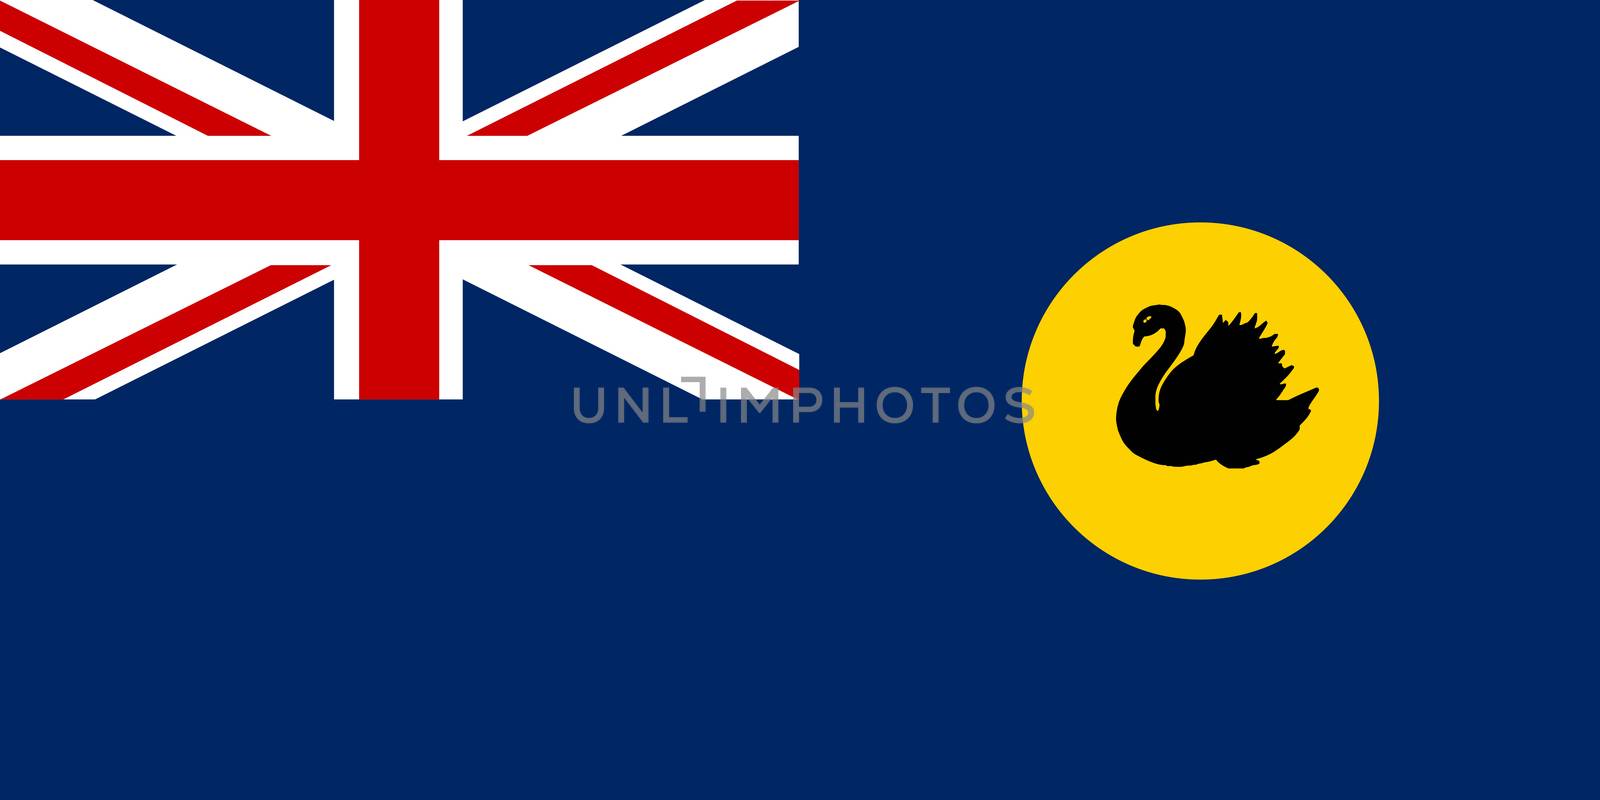 The flag of the state of Western Australia